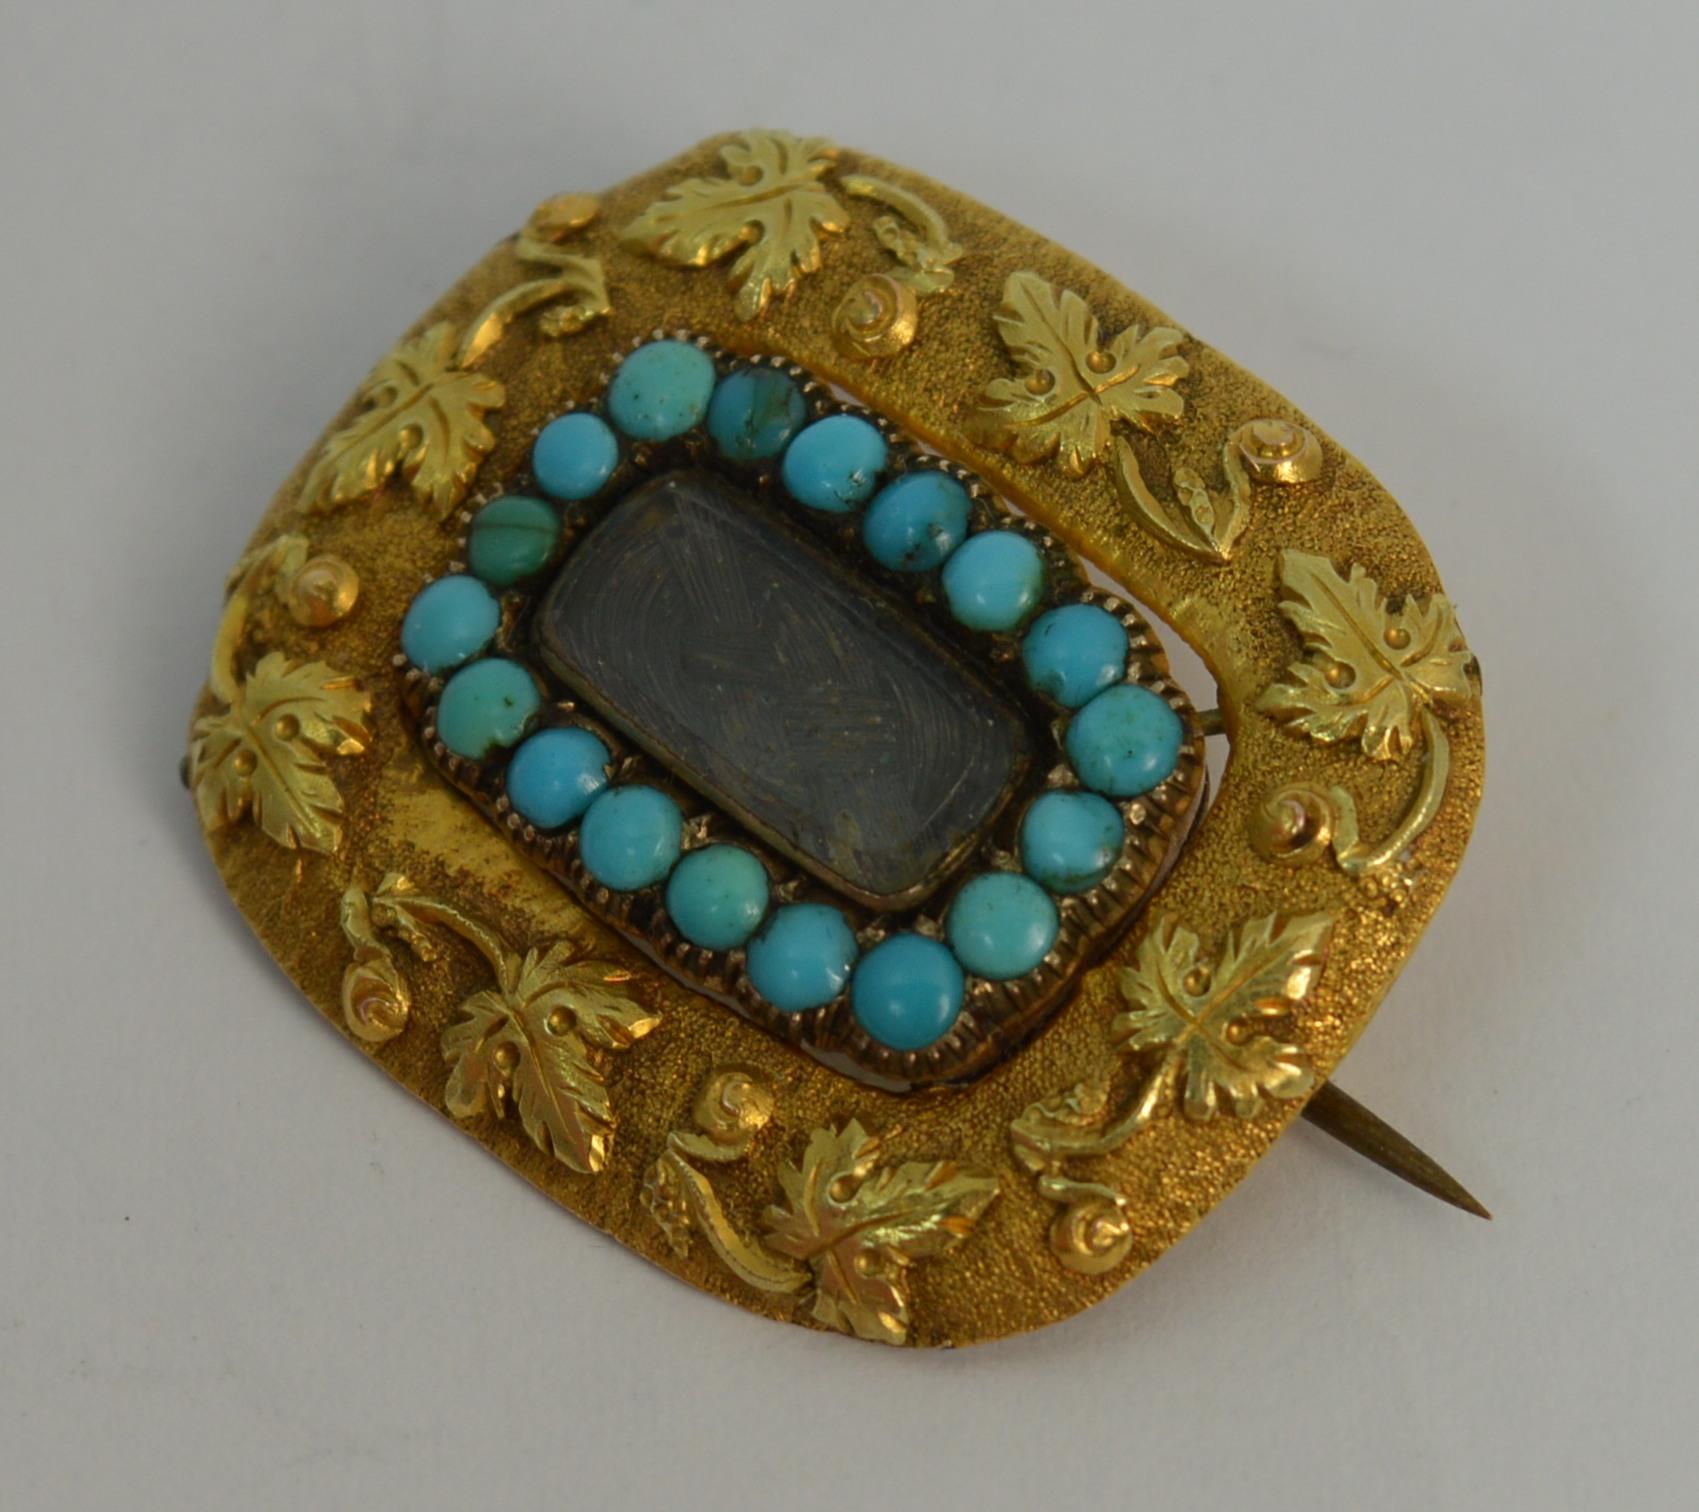 George III Georgian Era 18 Carat Gold Turquoise and Hair Mourning Brooch For Sale